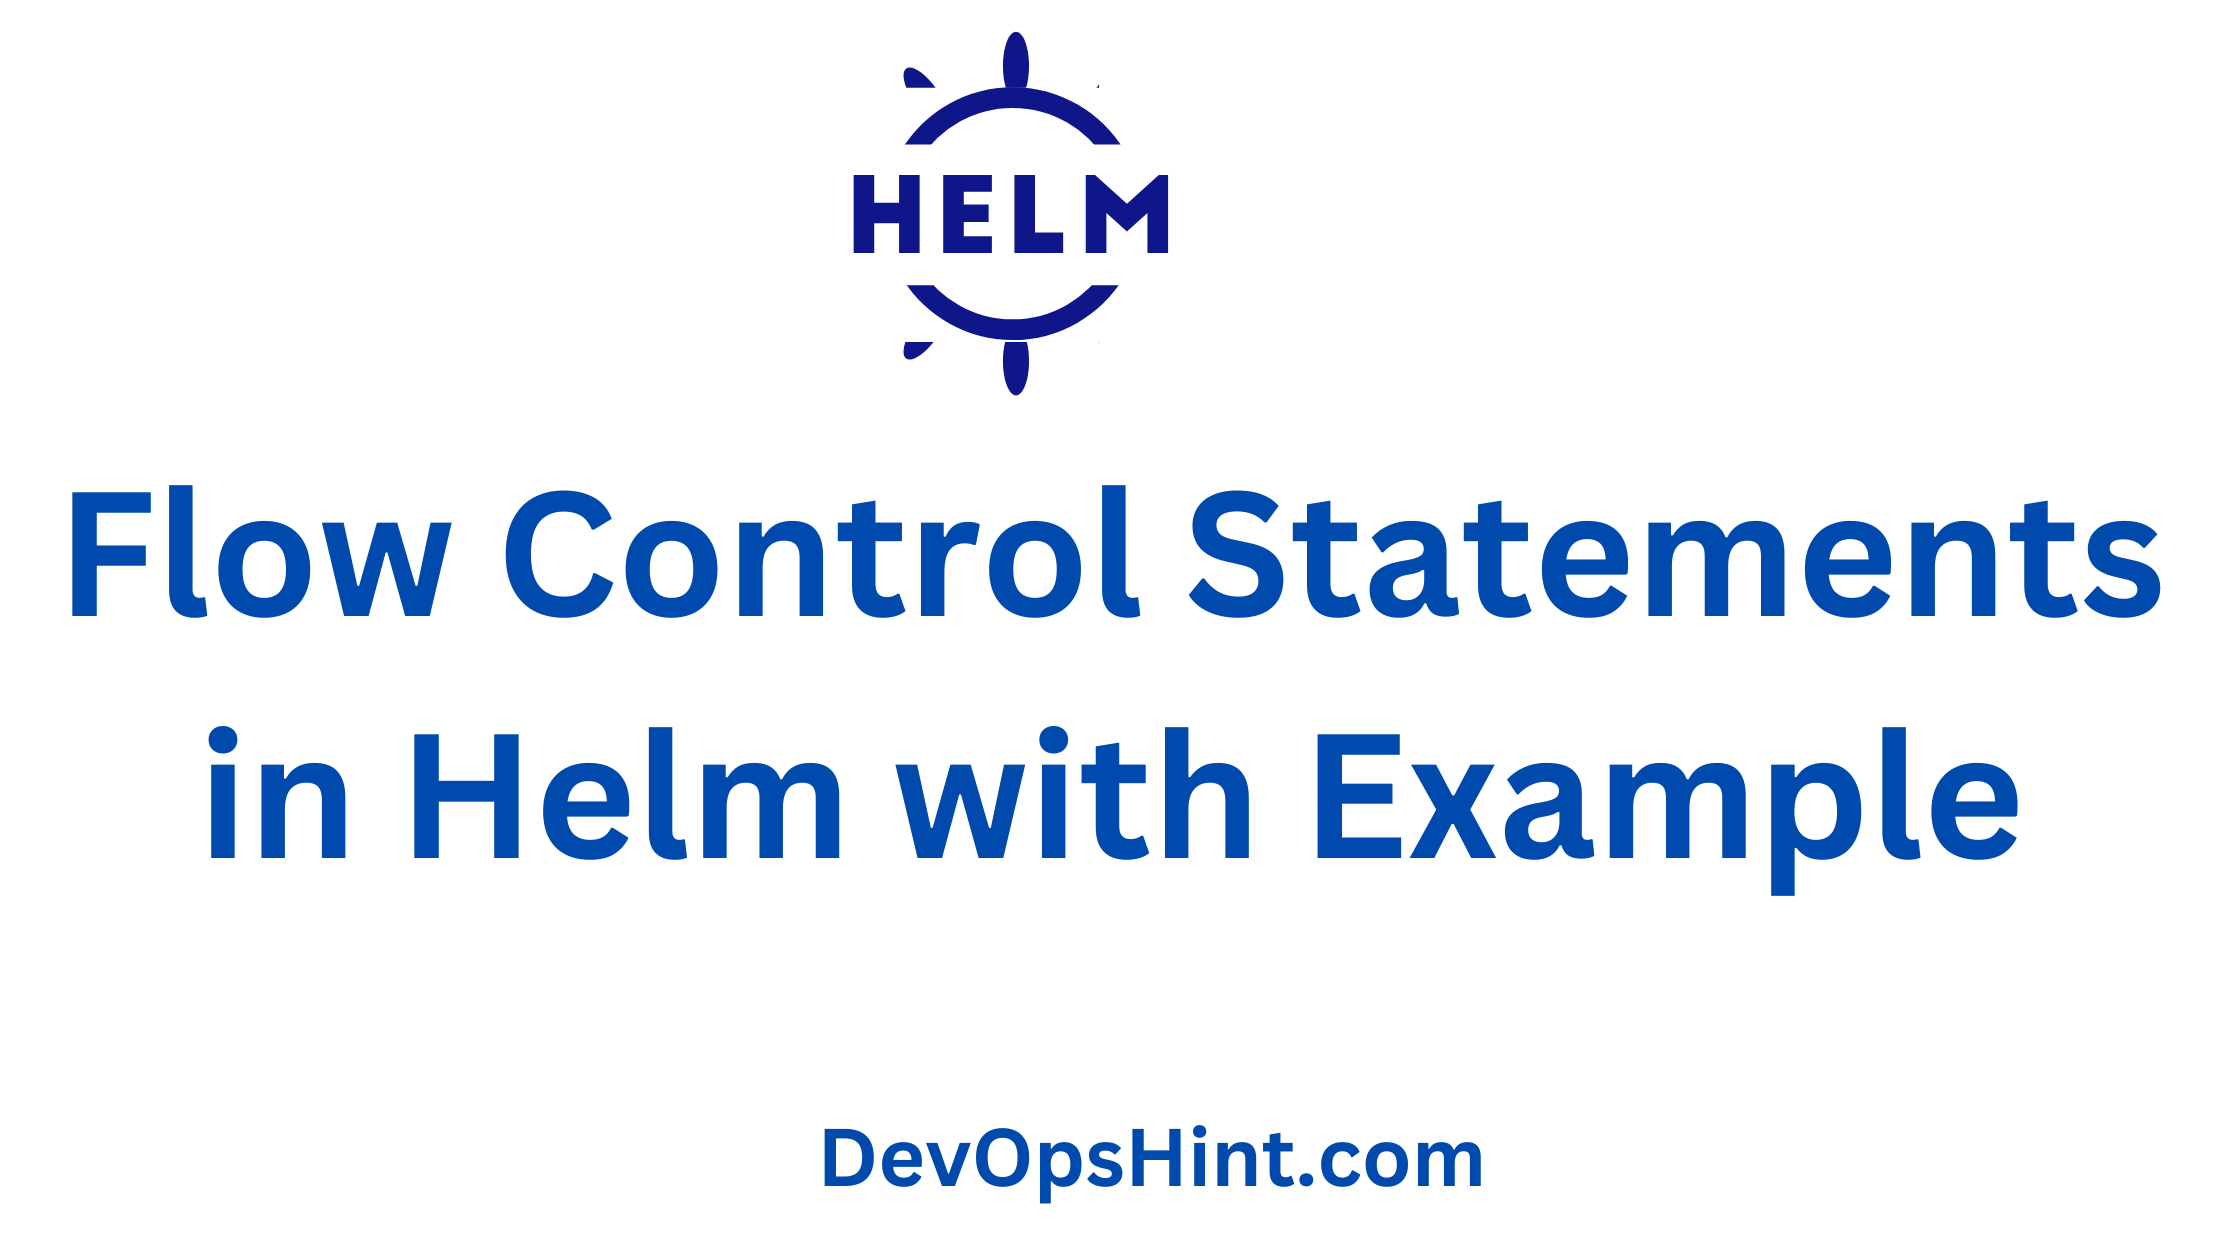 Flow Control Statements in Helm with Example